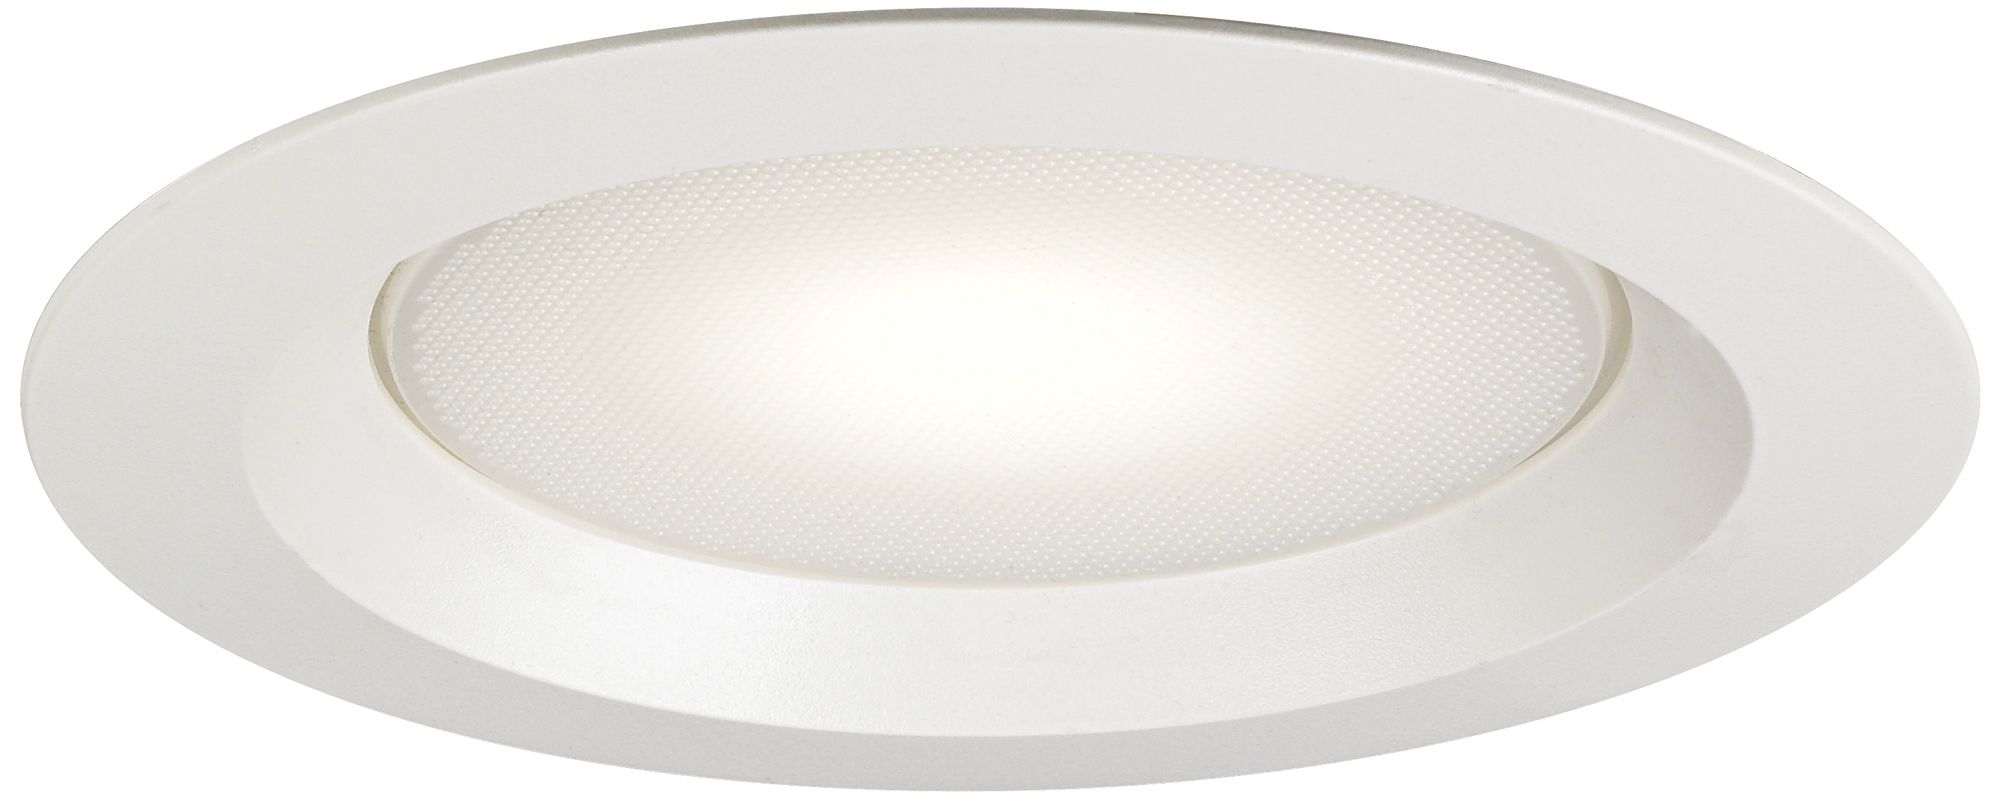 6” INCH RECESSED CAN LIGHT SHOWER TRIM FROSTED GLASS ALBALITE LENS Replaces JUNO 20-PW 6 PACK 